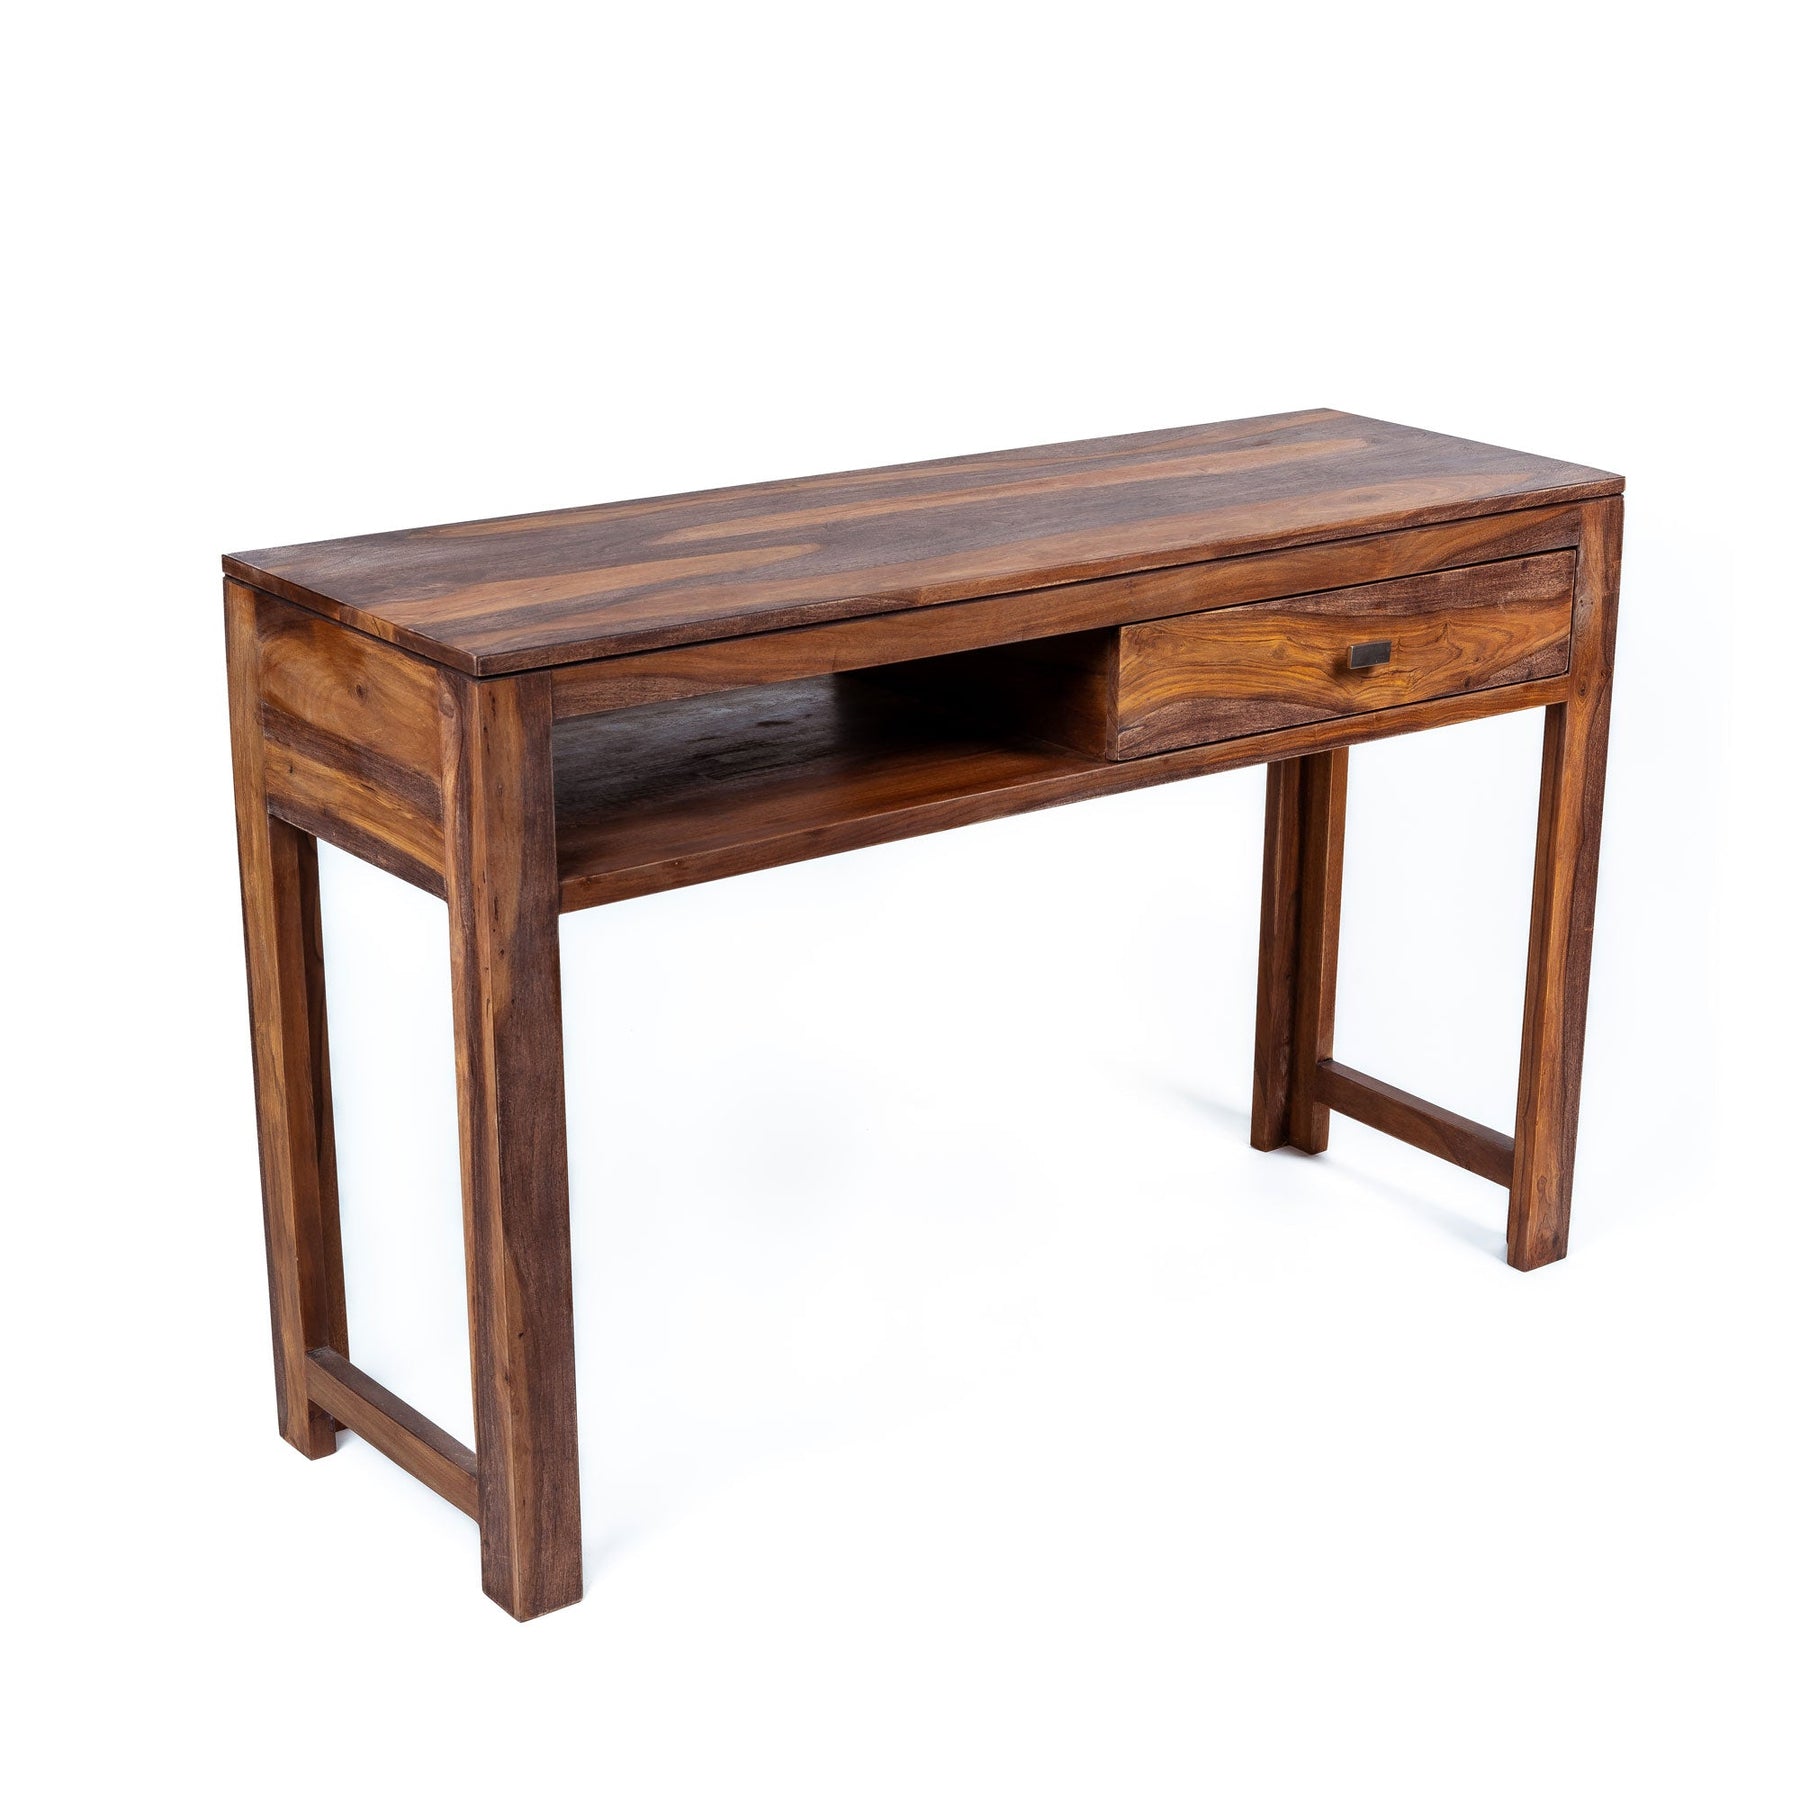 Console Desk Large | Wooden Large Console Unit | Console Table Desk with One Drawer and One Shelf | 120x40x78 cm